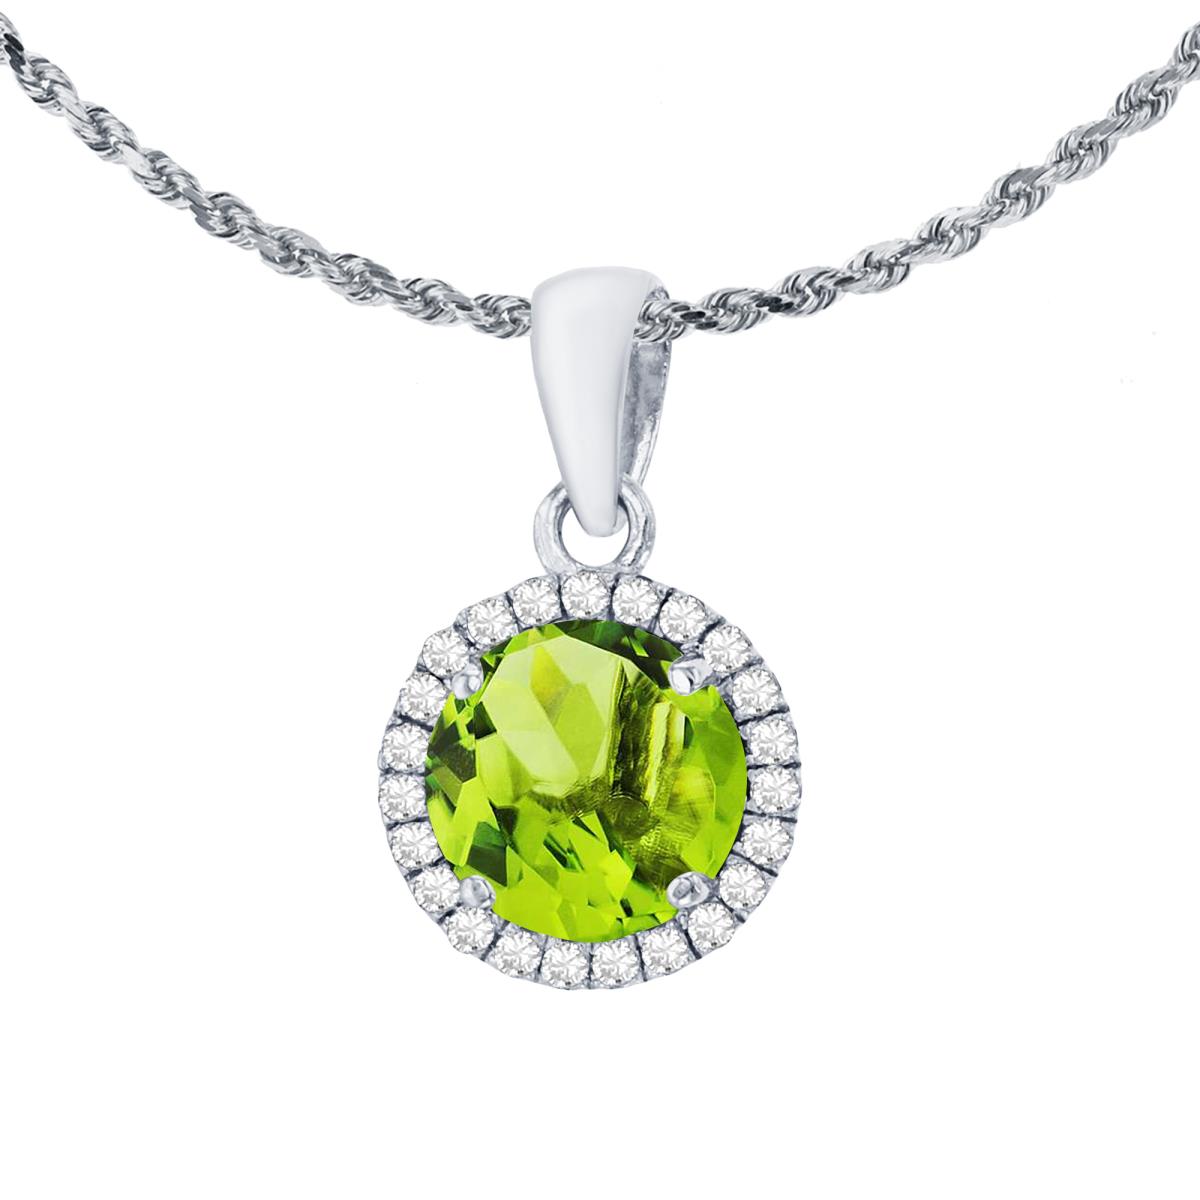 14K White Gold 7mm Round Peridot & 0.12 CTTW Diamond Halo 18" Rope Chain Necklace